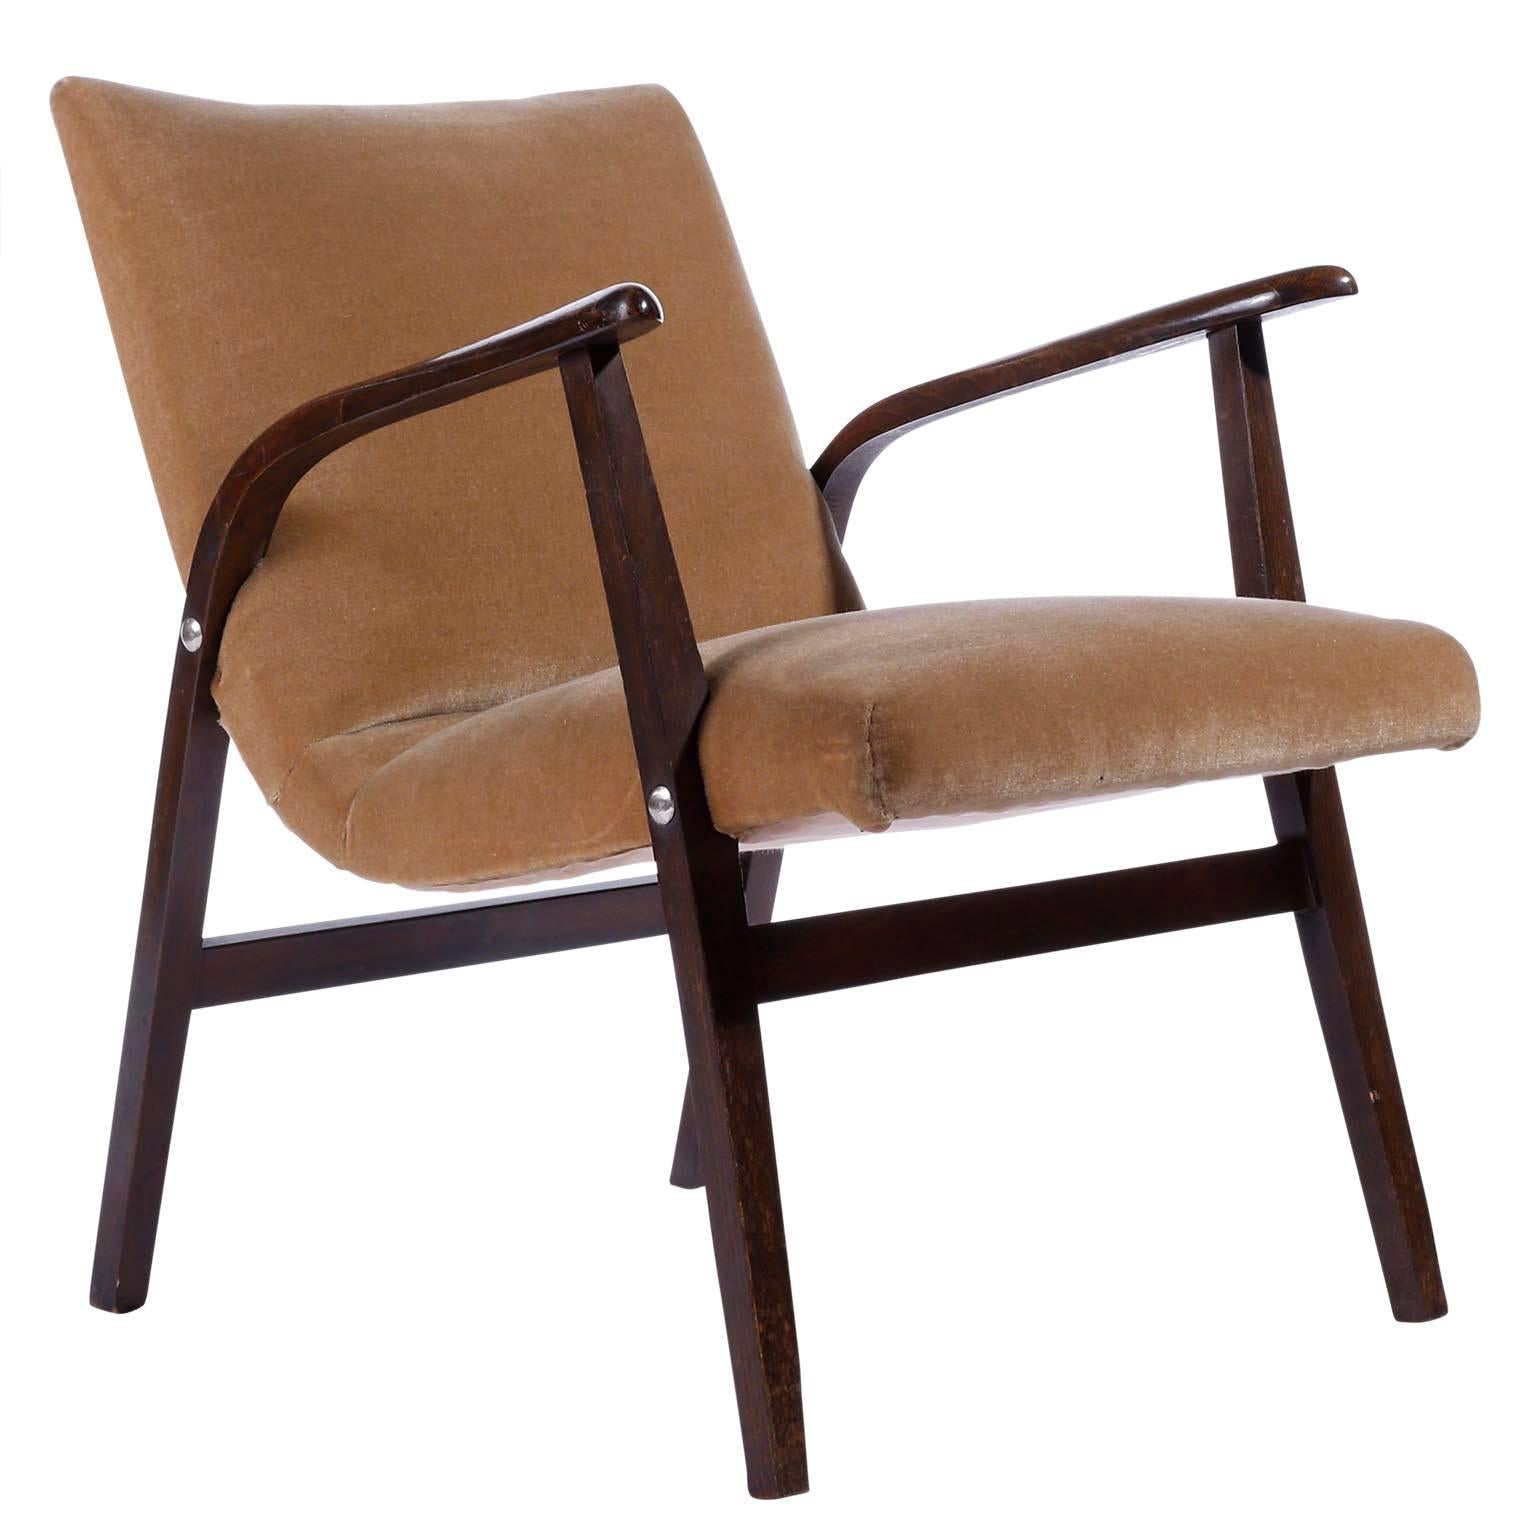 Austrian Pair of Roland Rainer Lounge Chairs Armchairs Cafe Ritter, Velvet Wood, 1950s For Sale